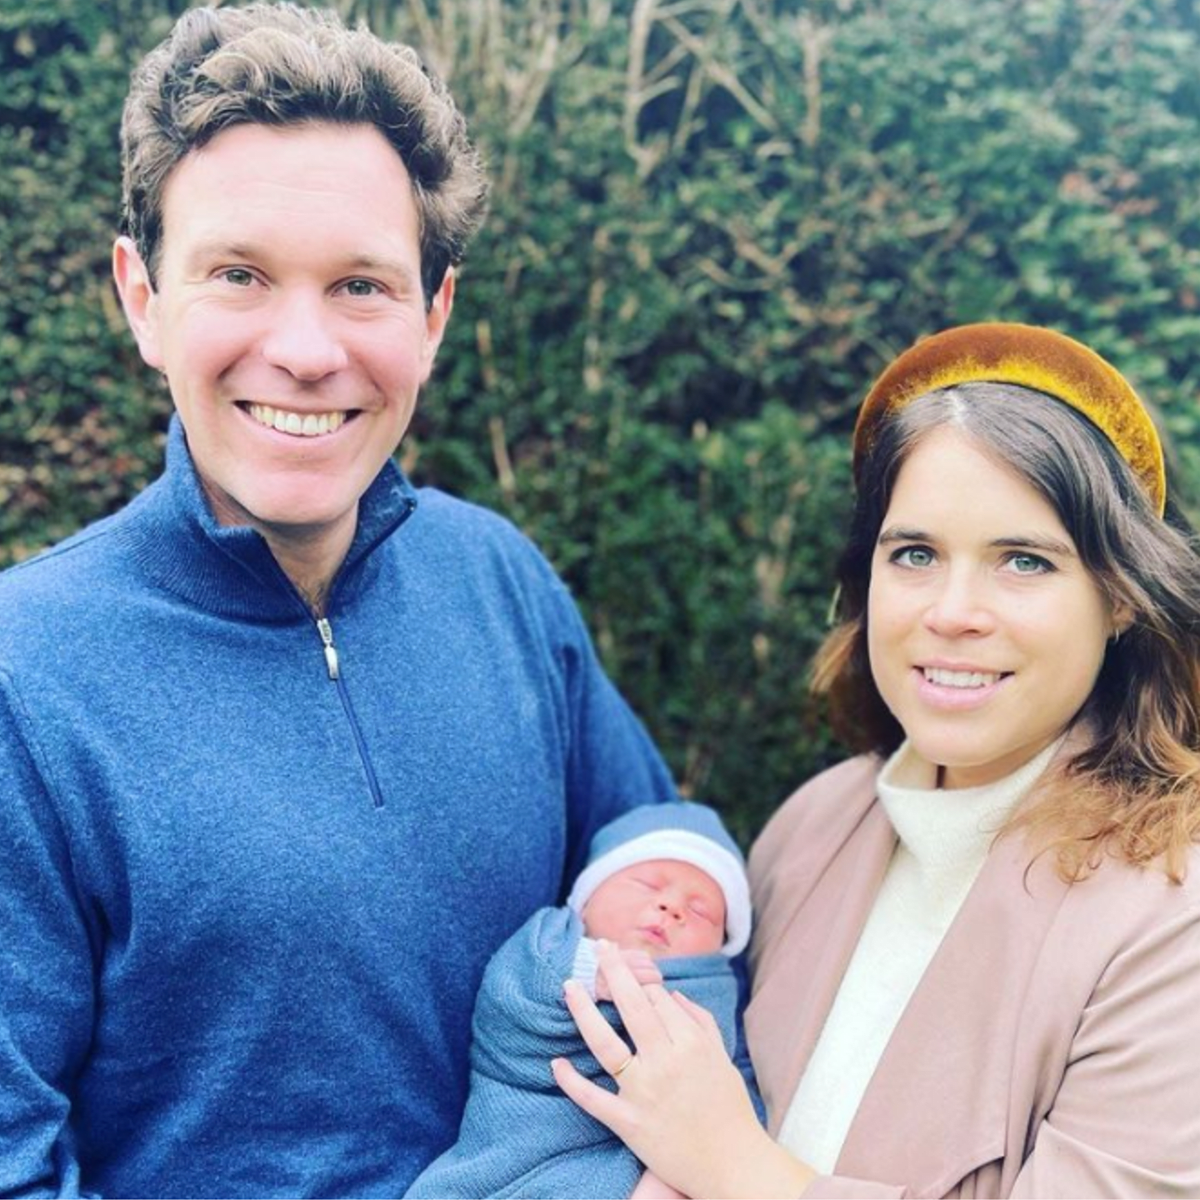 Princess Eugenie’s son August was born on February 9, 2021